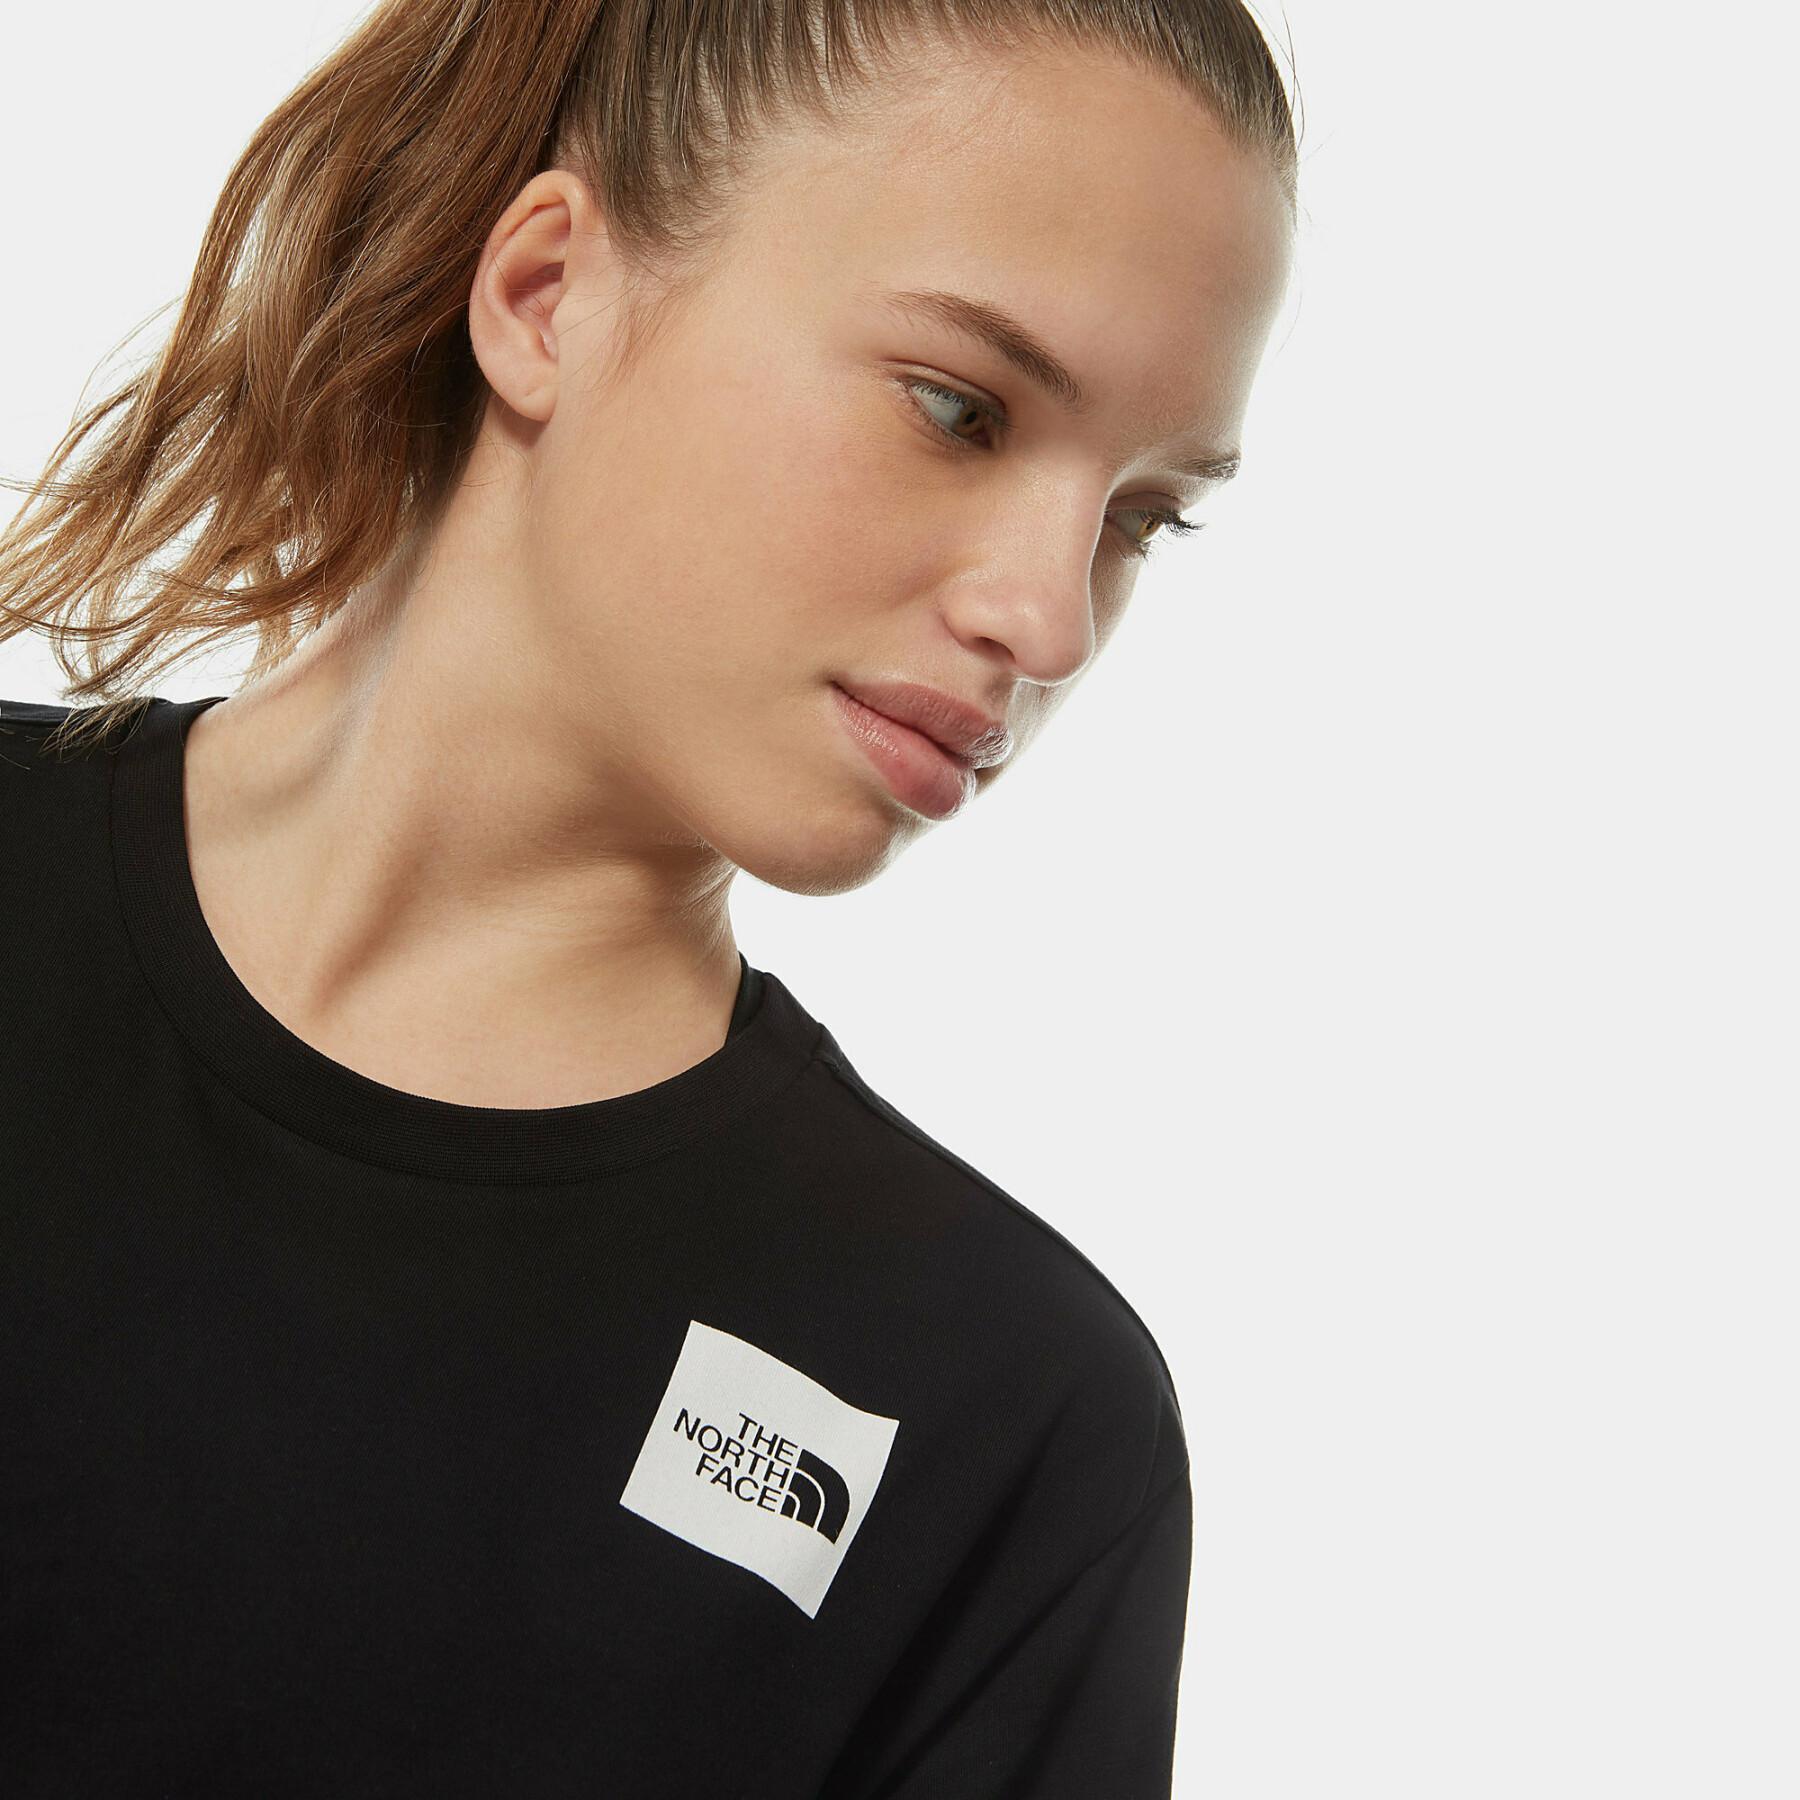 T-shirt femme The North Face